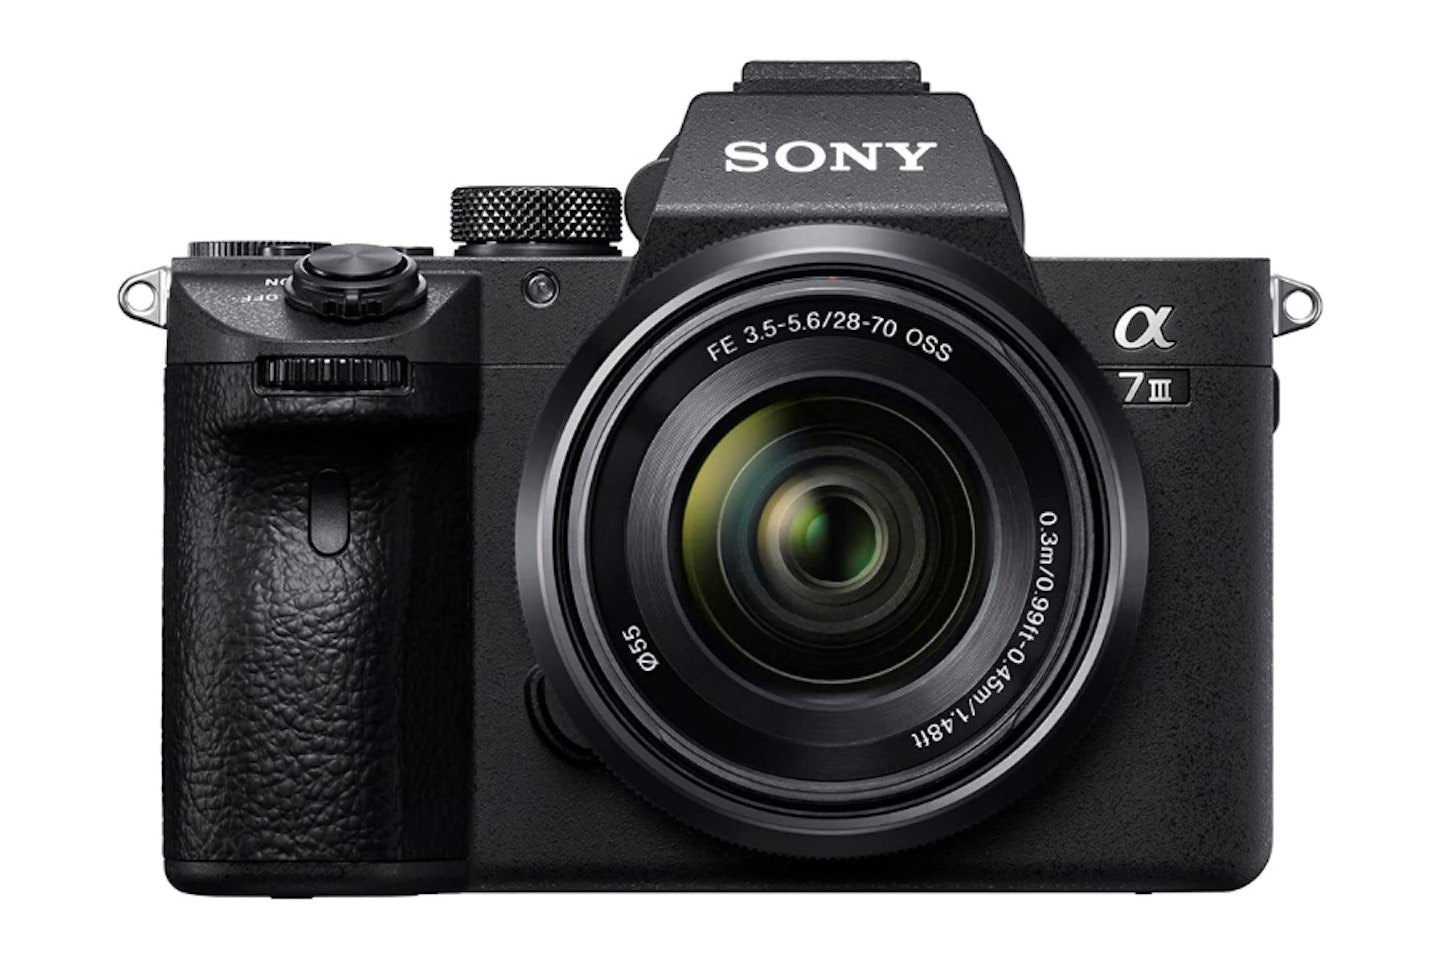 Sony Alpha 7 III - one of the best entry-level cameras